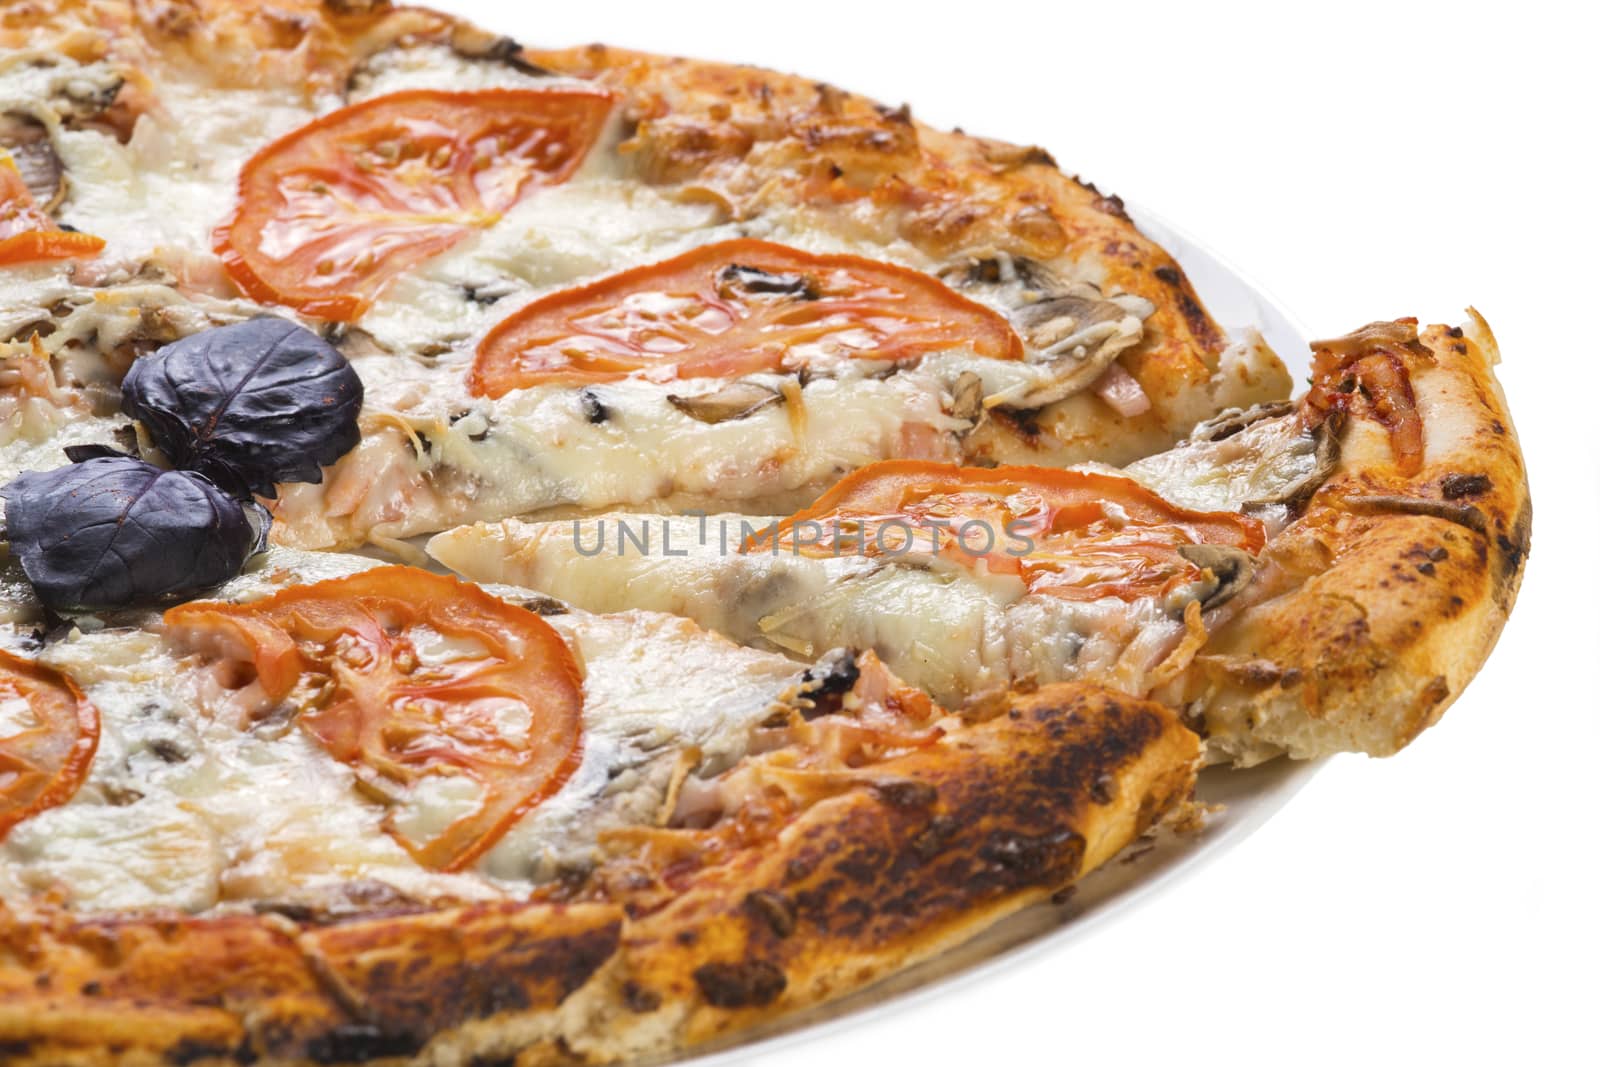 Tasty pizza with sausage, mushrooms and tomato by kzen